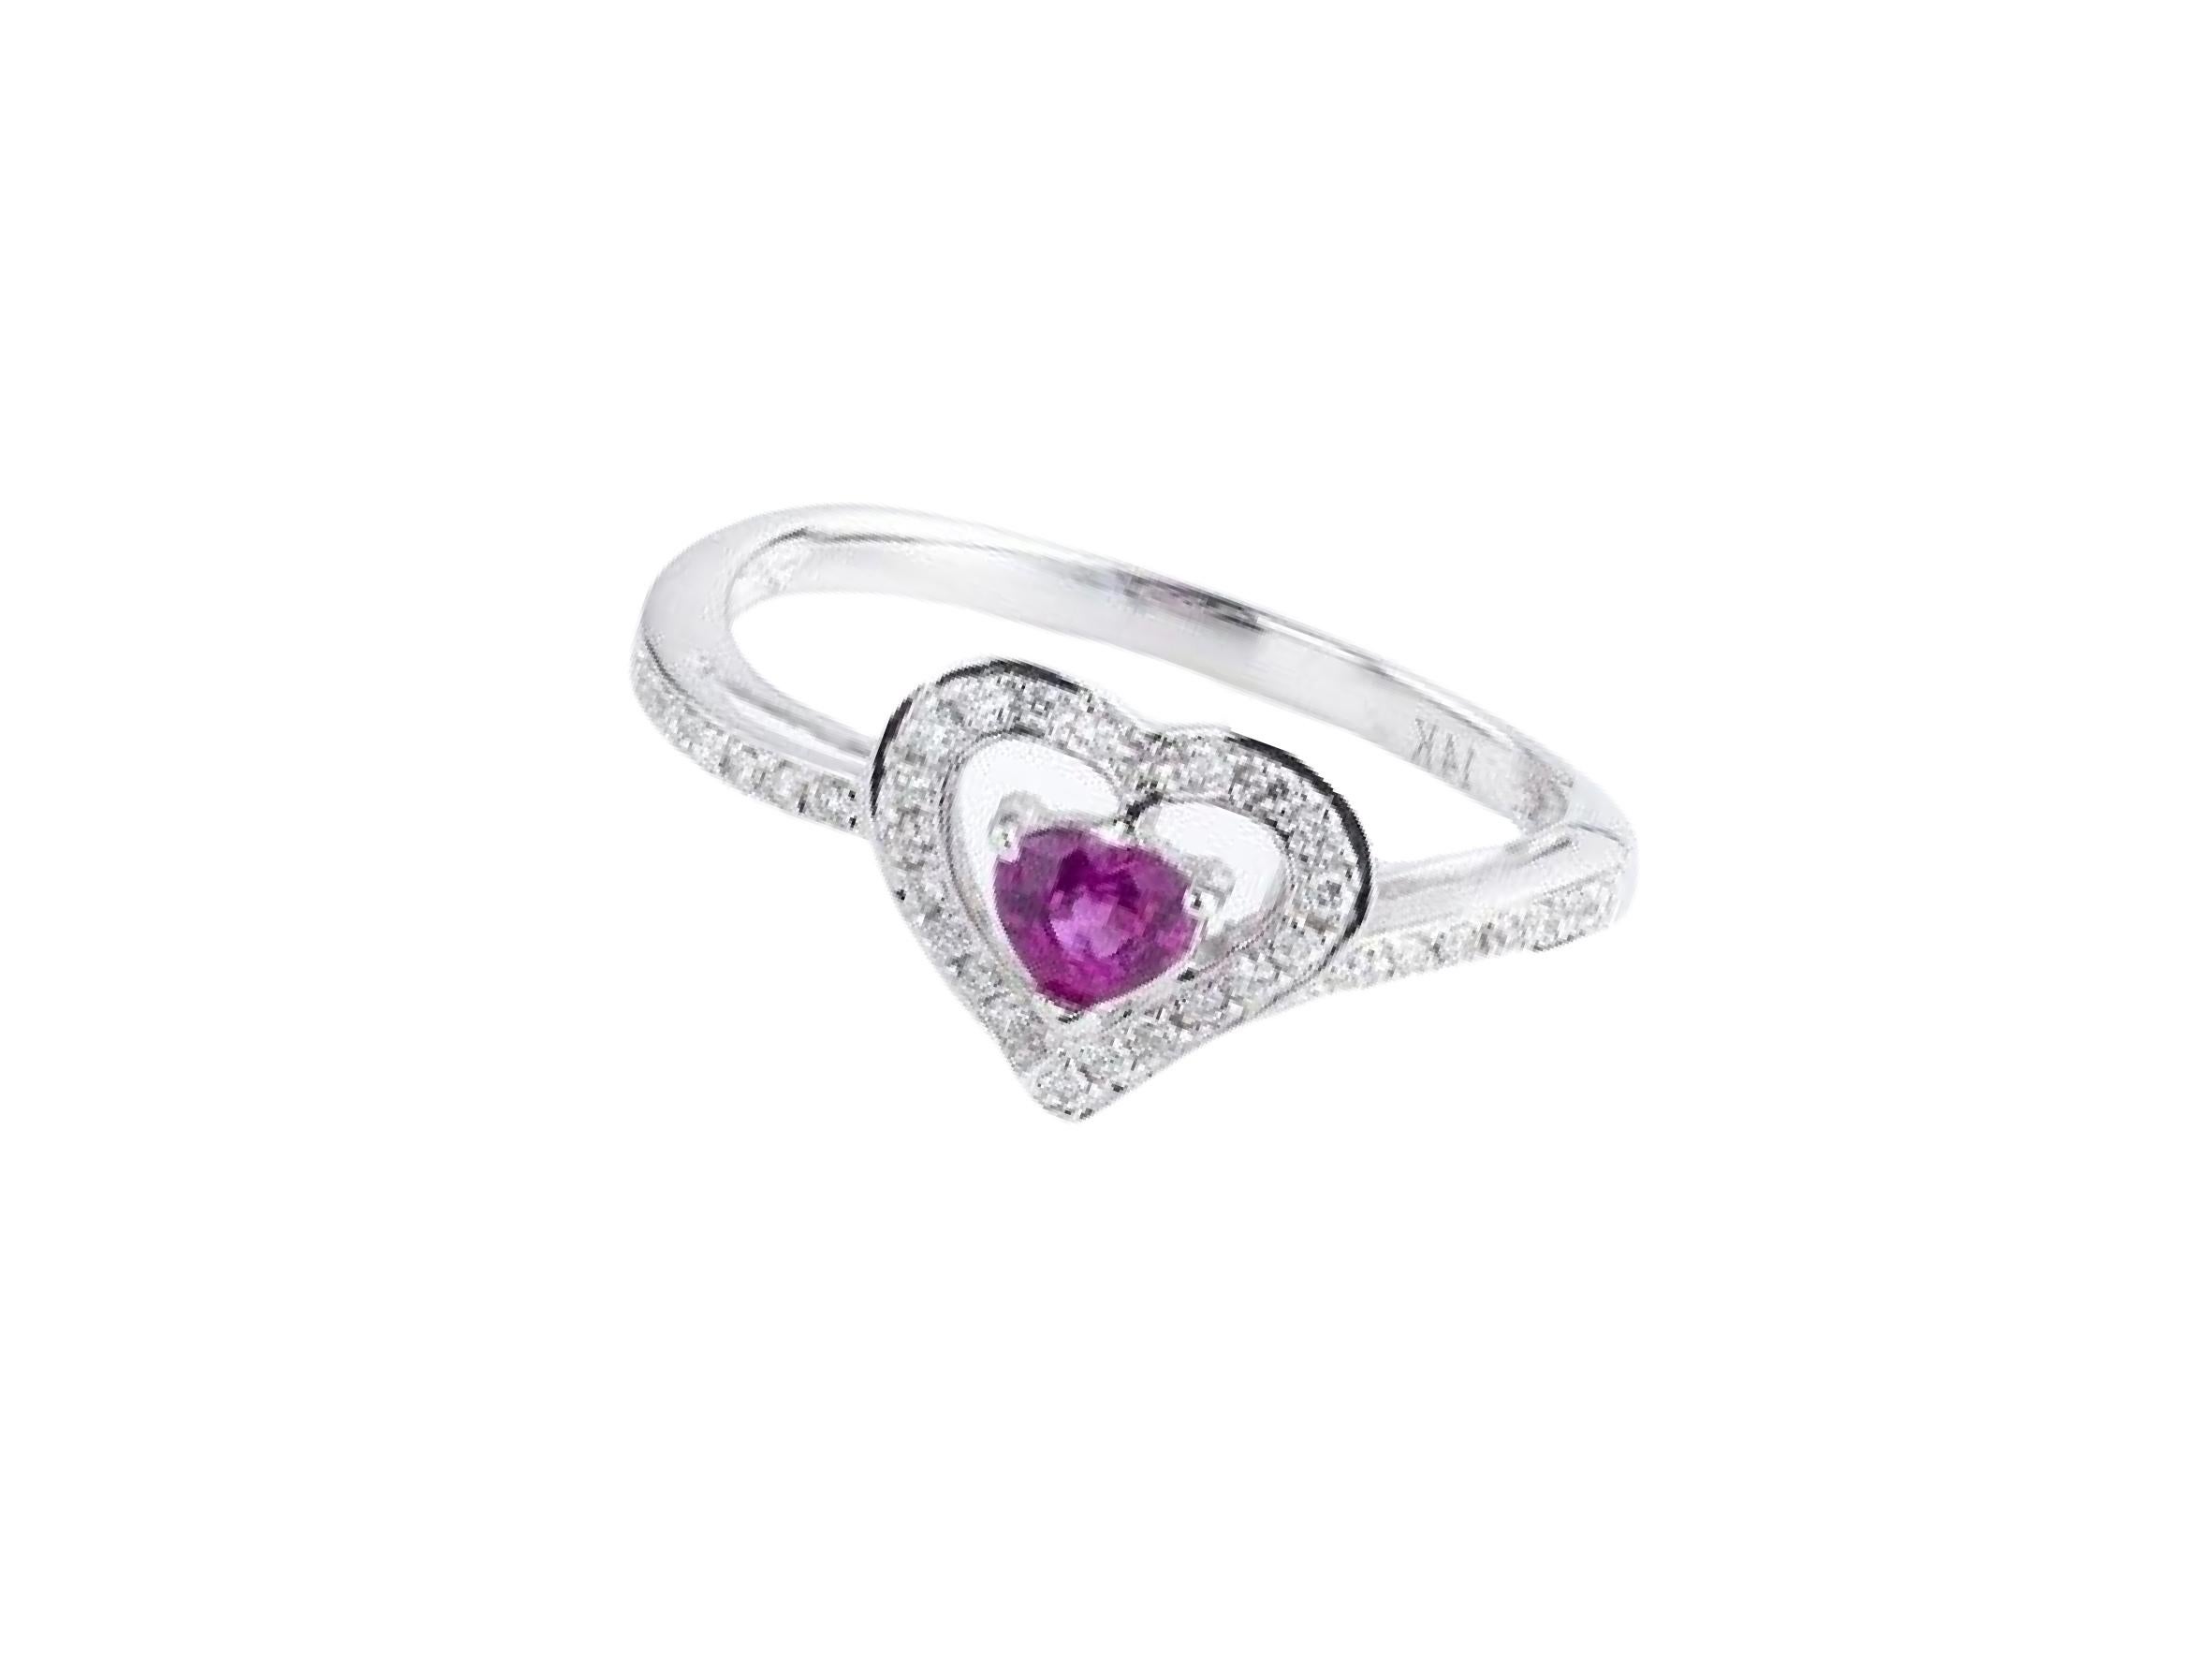 For Sale:  0.403 Carat Ruby and Diamond Heart Ring in 14 Karat White Gold 4